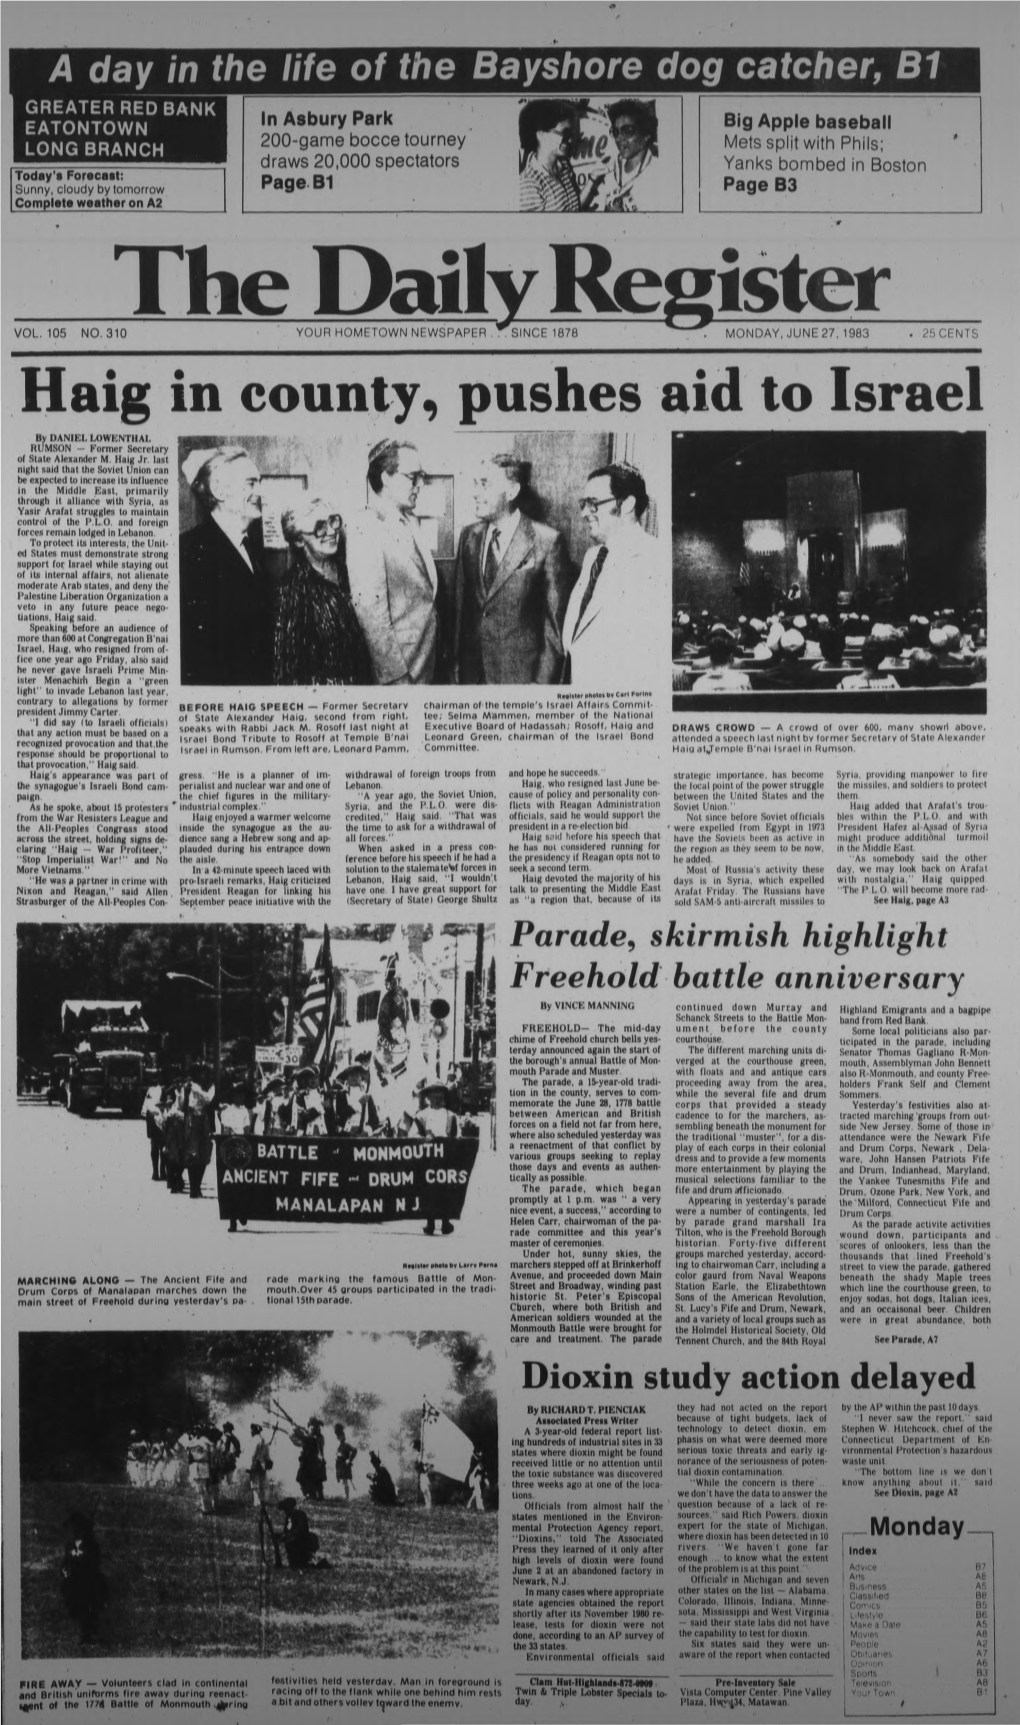 Haig in County, Pushes Aid to Israel by DANIEL LOWENTHAL RUMSON - Former Secretary of State Alexander M